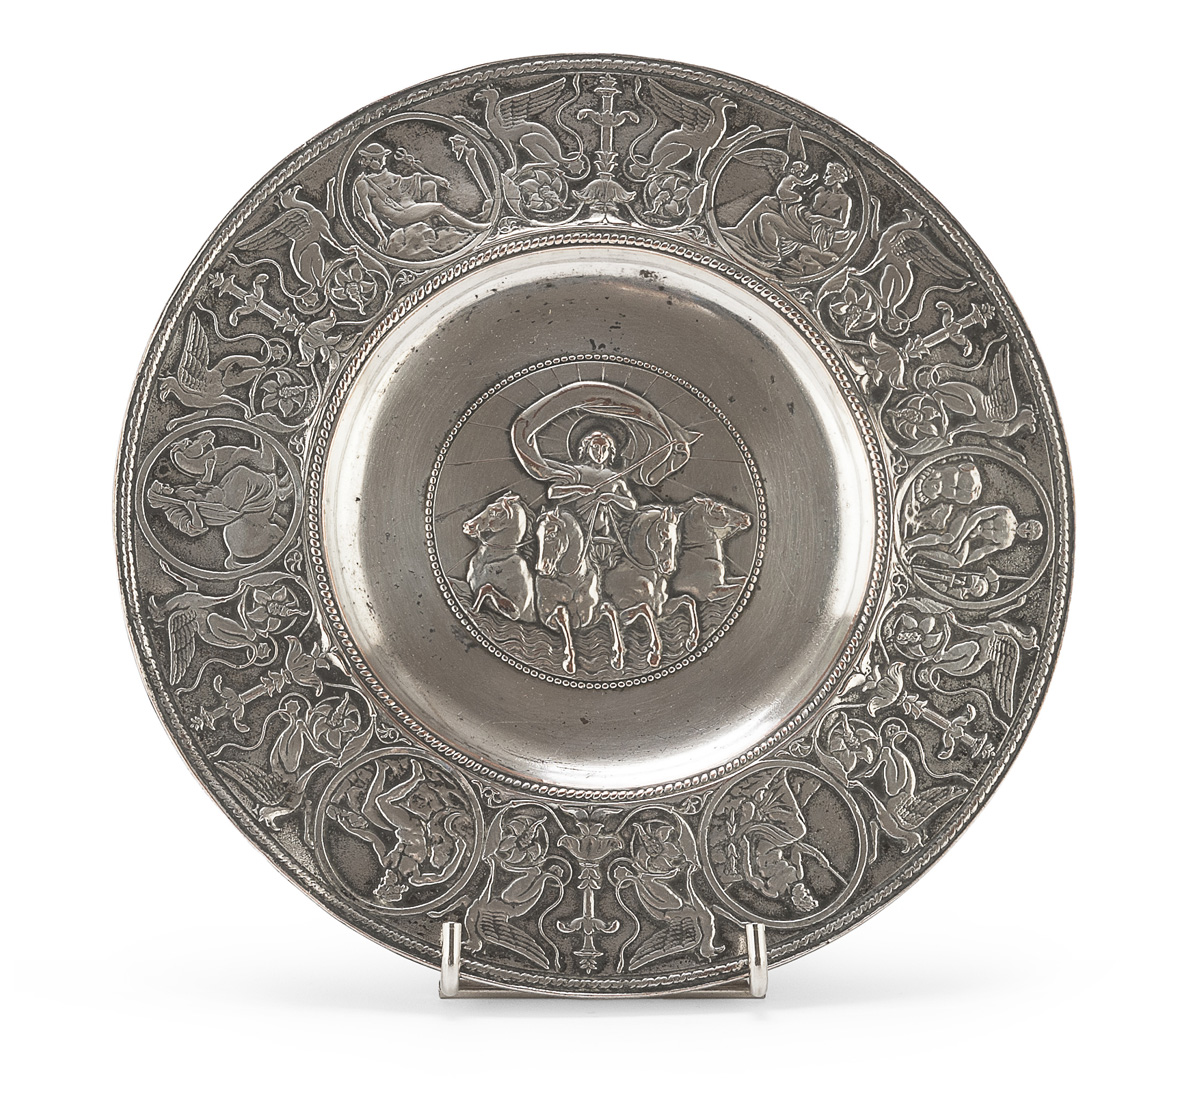 SILVER-PLATED SAUCER 20TH CENTURY